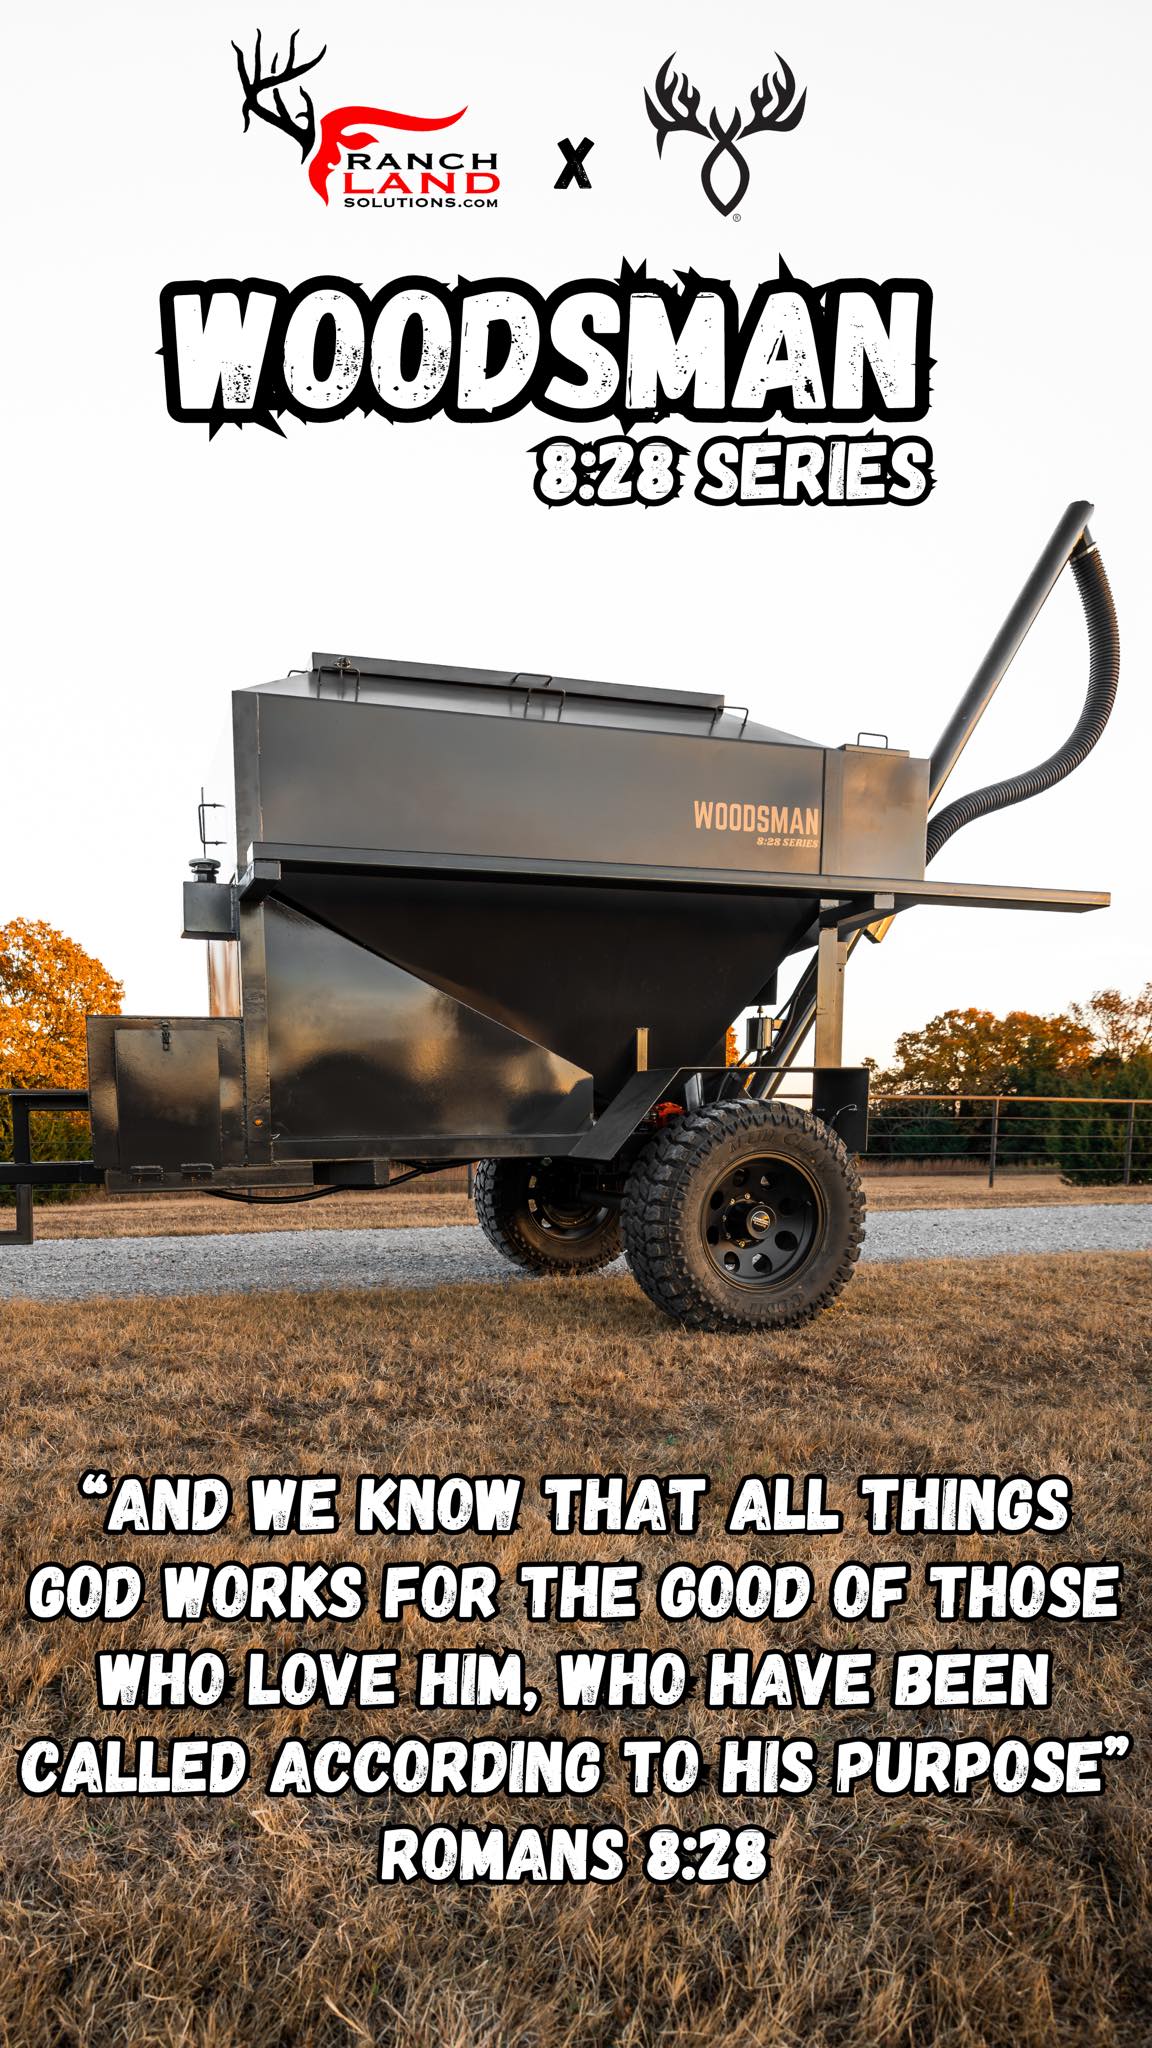 Ranchland Solutions Woodsman 8:28 series